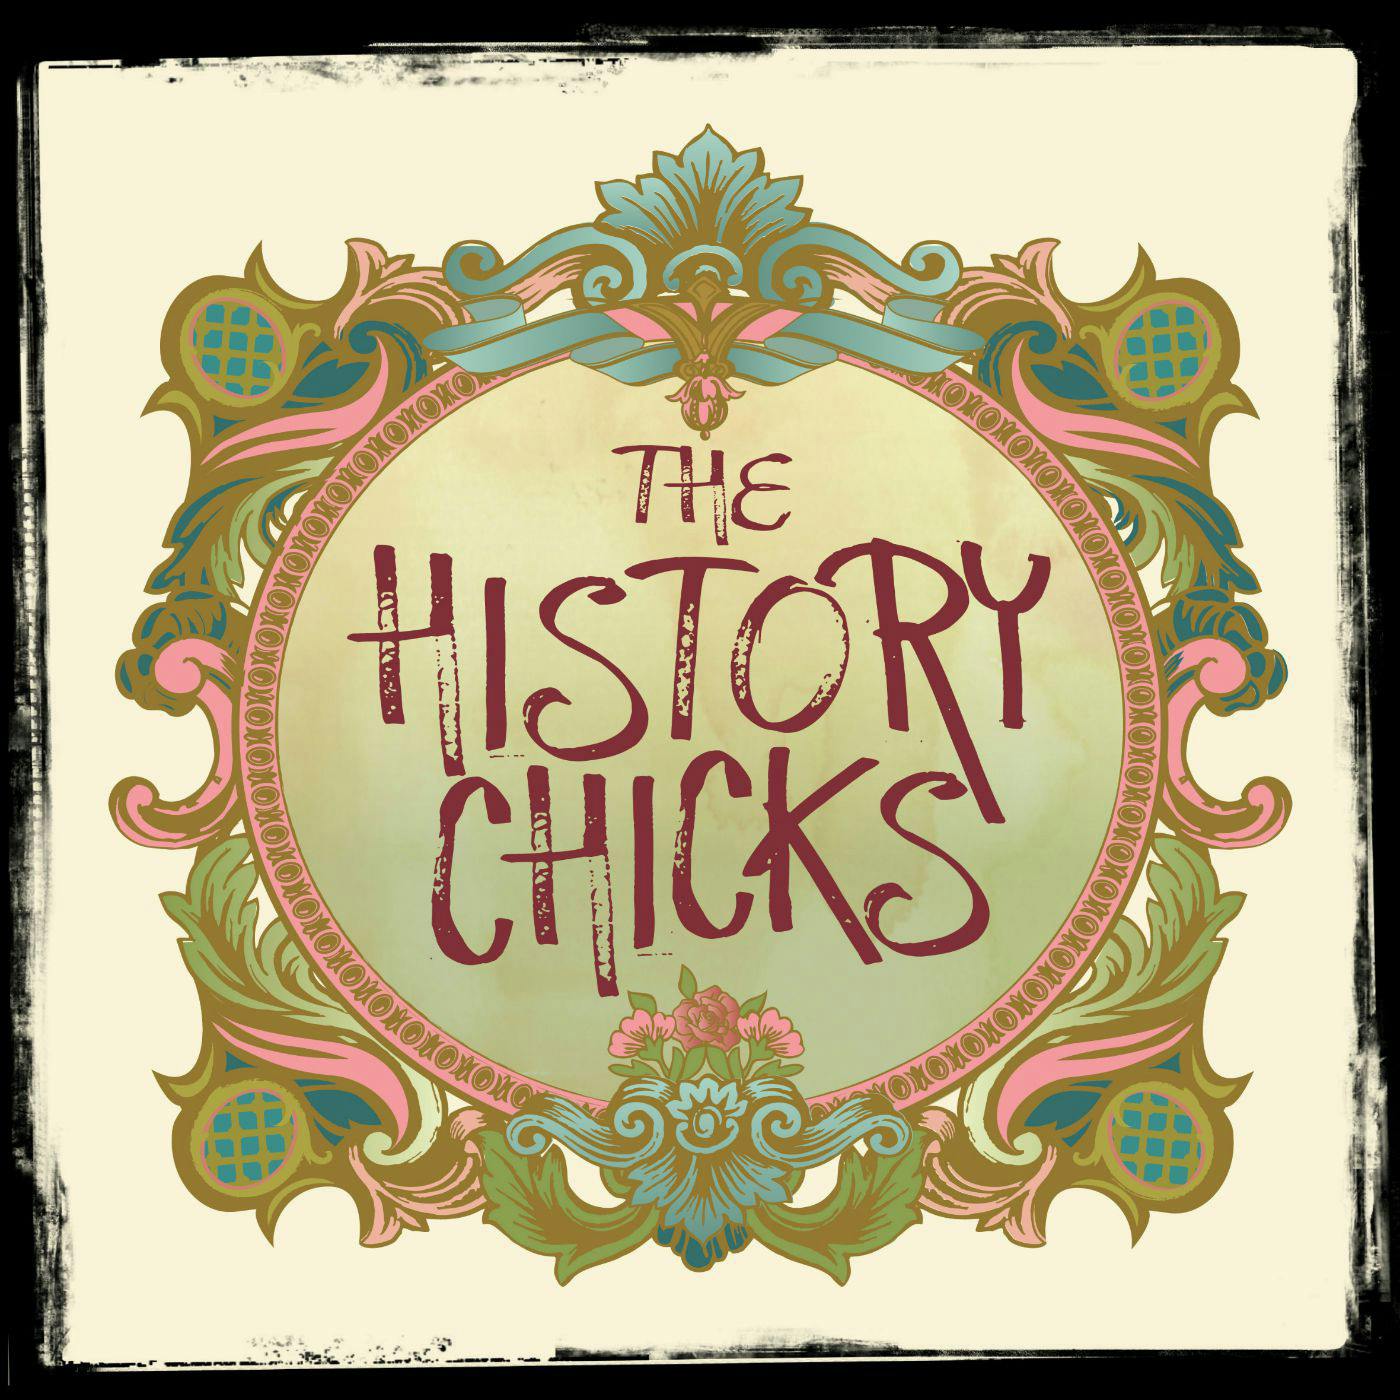 Introduction to The History Chicks